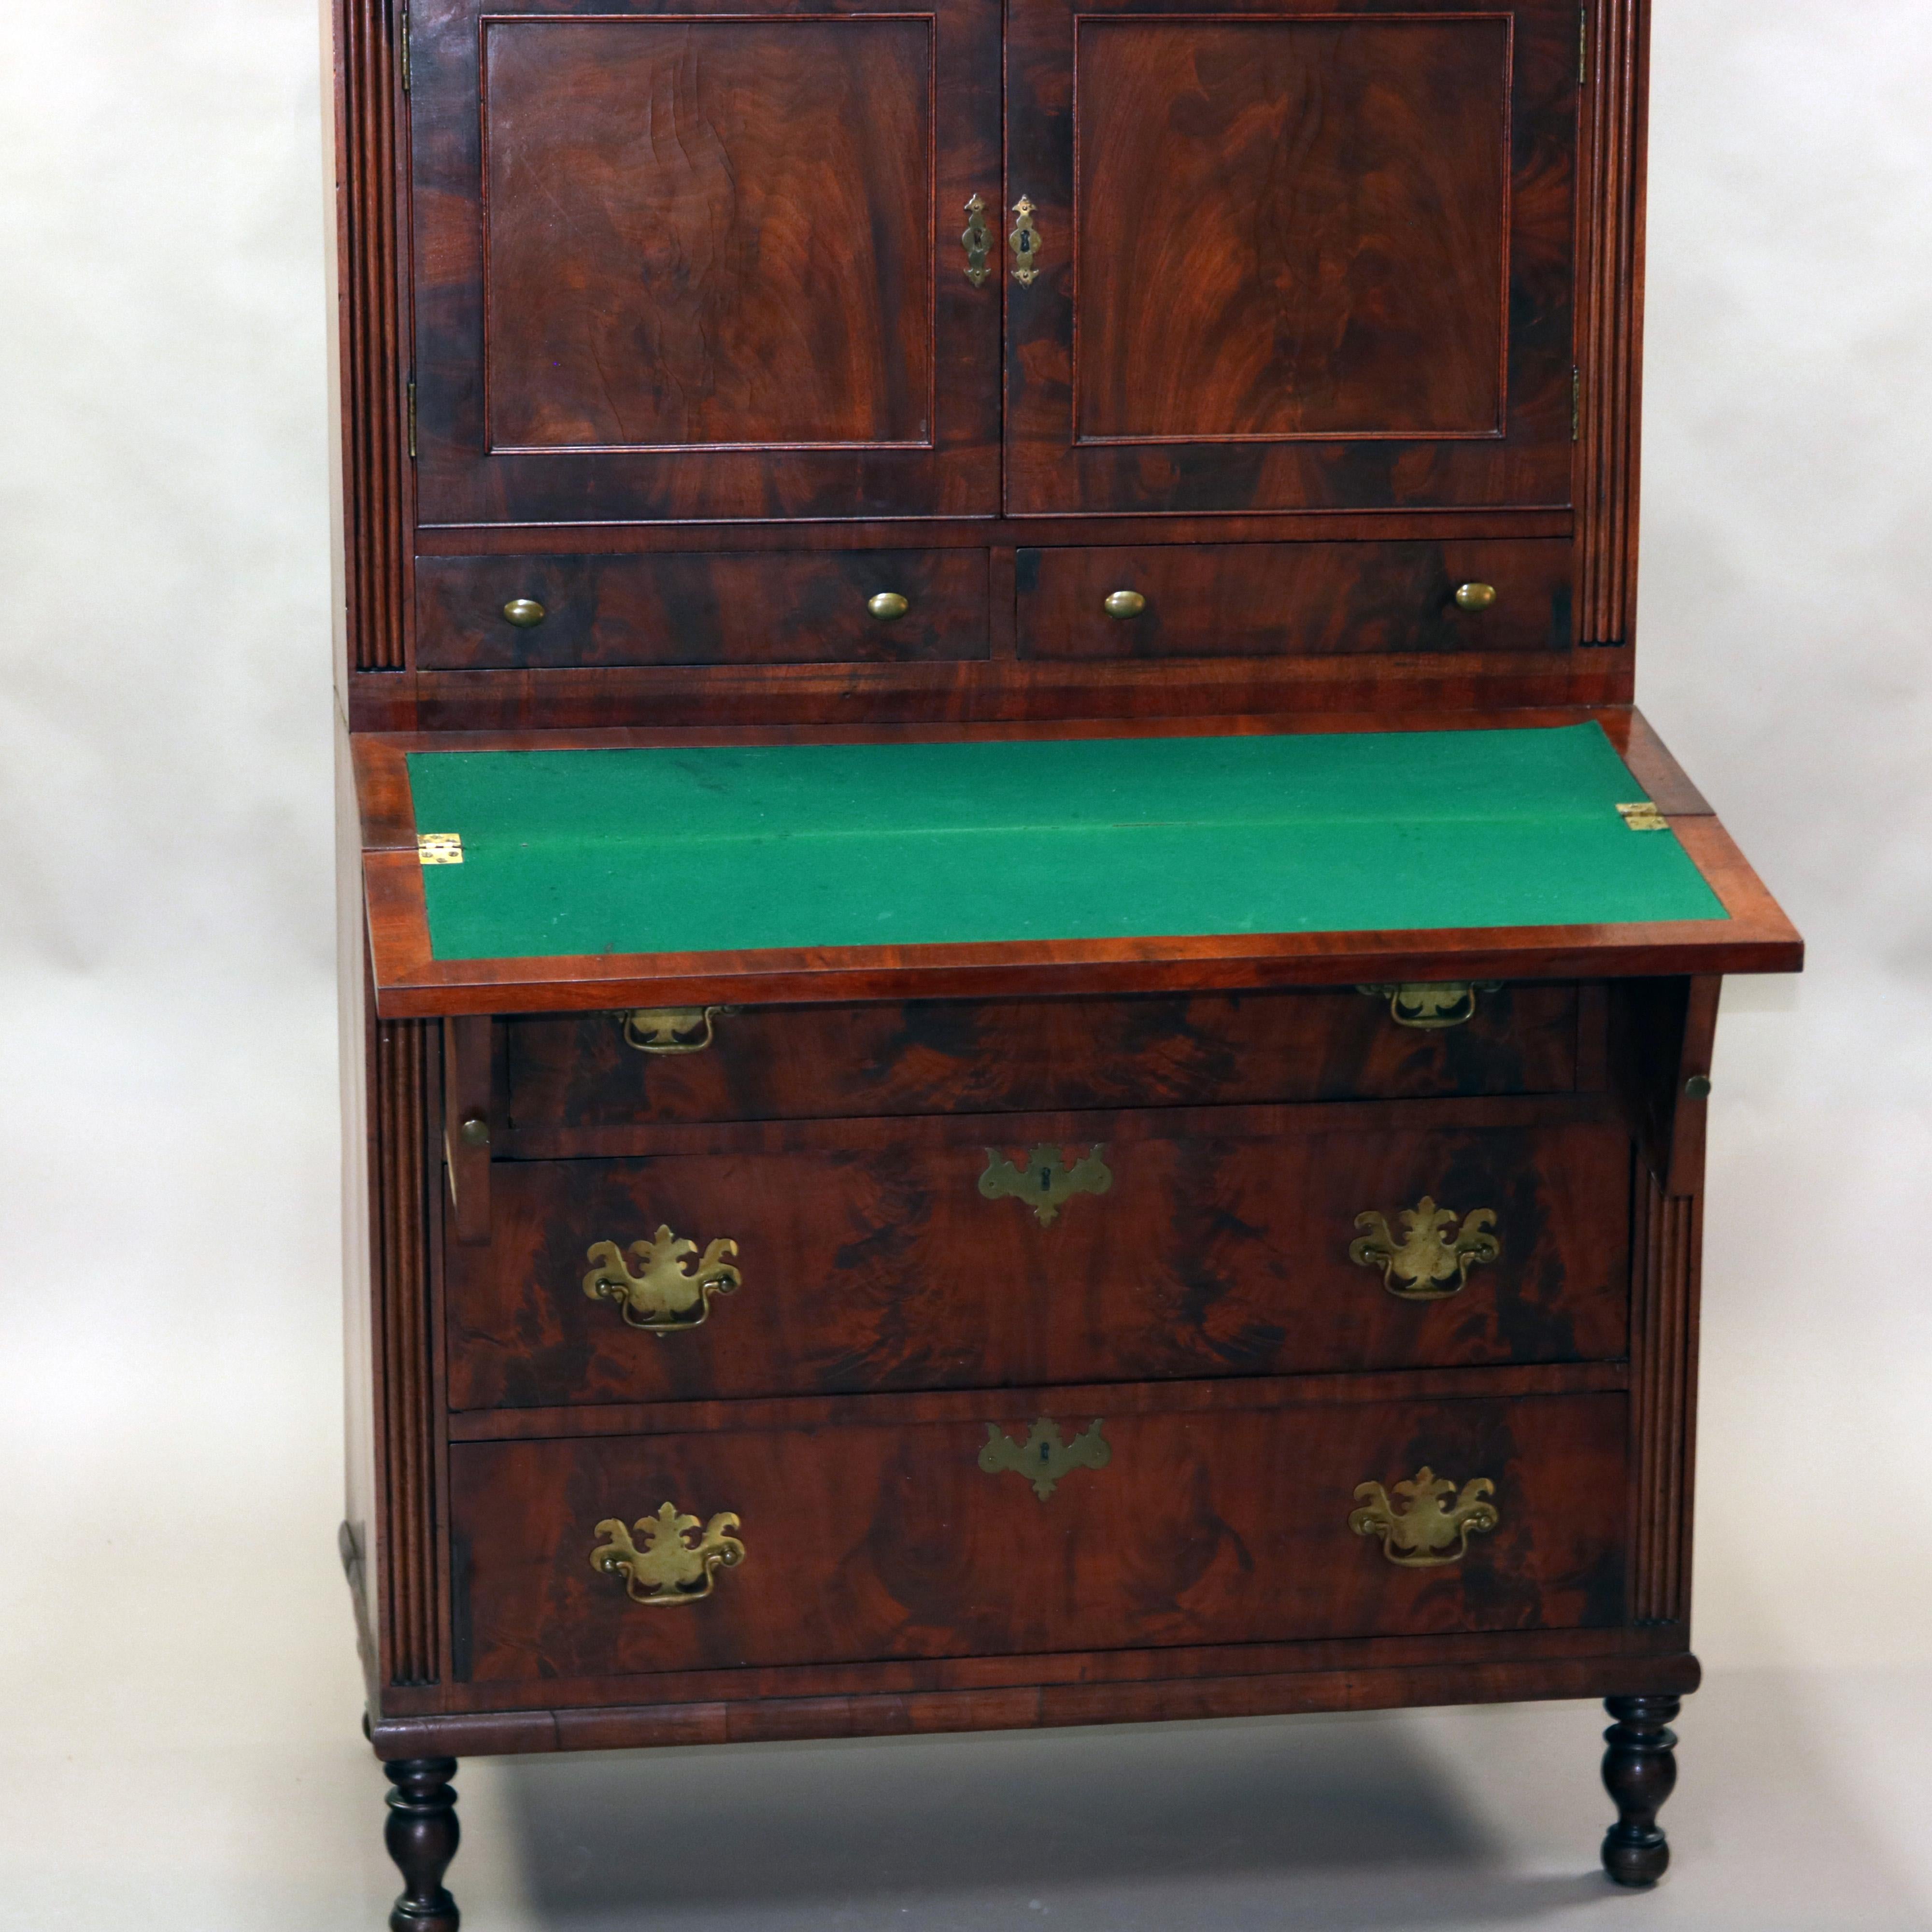 An antique Sheraton Tambour secretary offers deeply striated mahogany construction with upper double door cabinet over two lower drawers and surmounting cas with drop front desk and three long drawers, raised on turned feet, circa 1830

Measures: